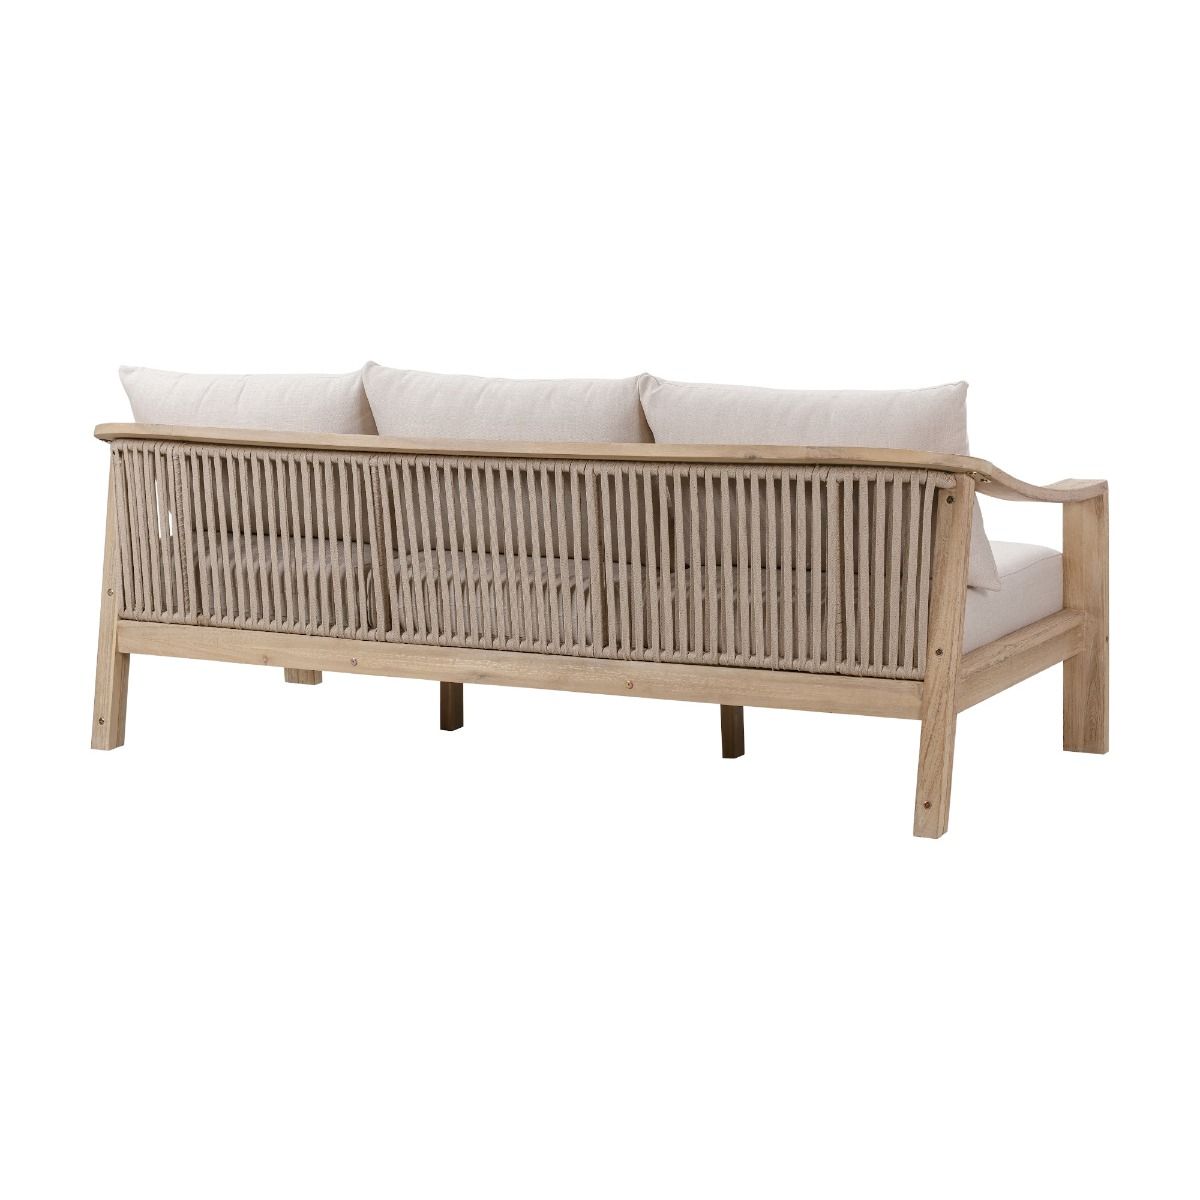 CR Sycamore Solid Timber 3 Seater Outdoor Lounge